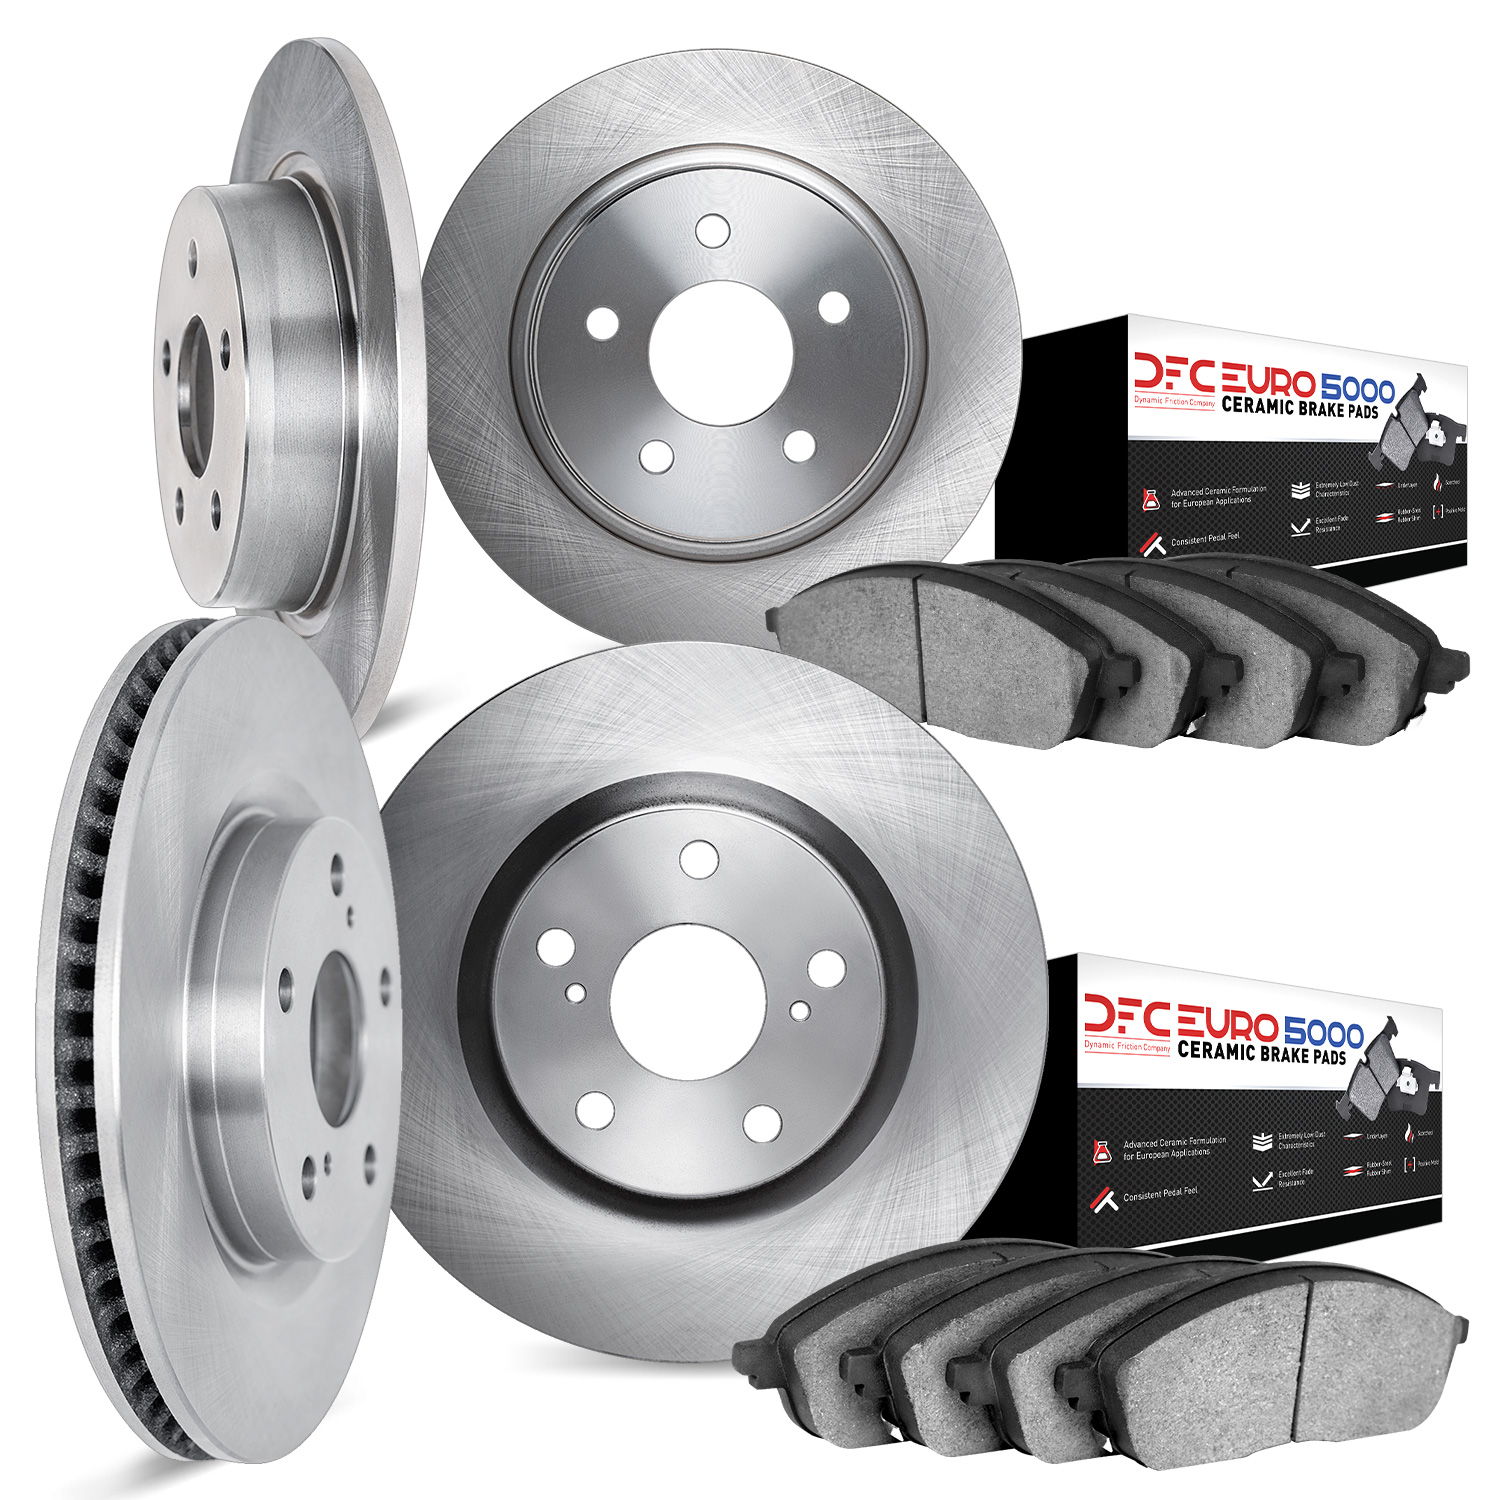 6604-31001 Brake Rotors w/5000 Euro Ceramic Brake Pads, 1982-1986 BMW, Position: Front and Rear